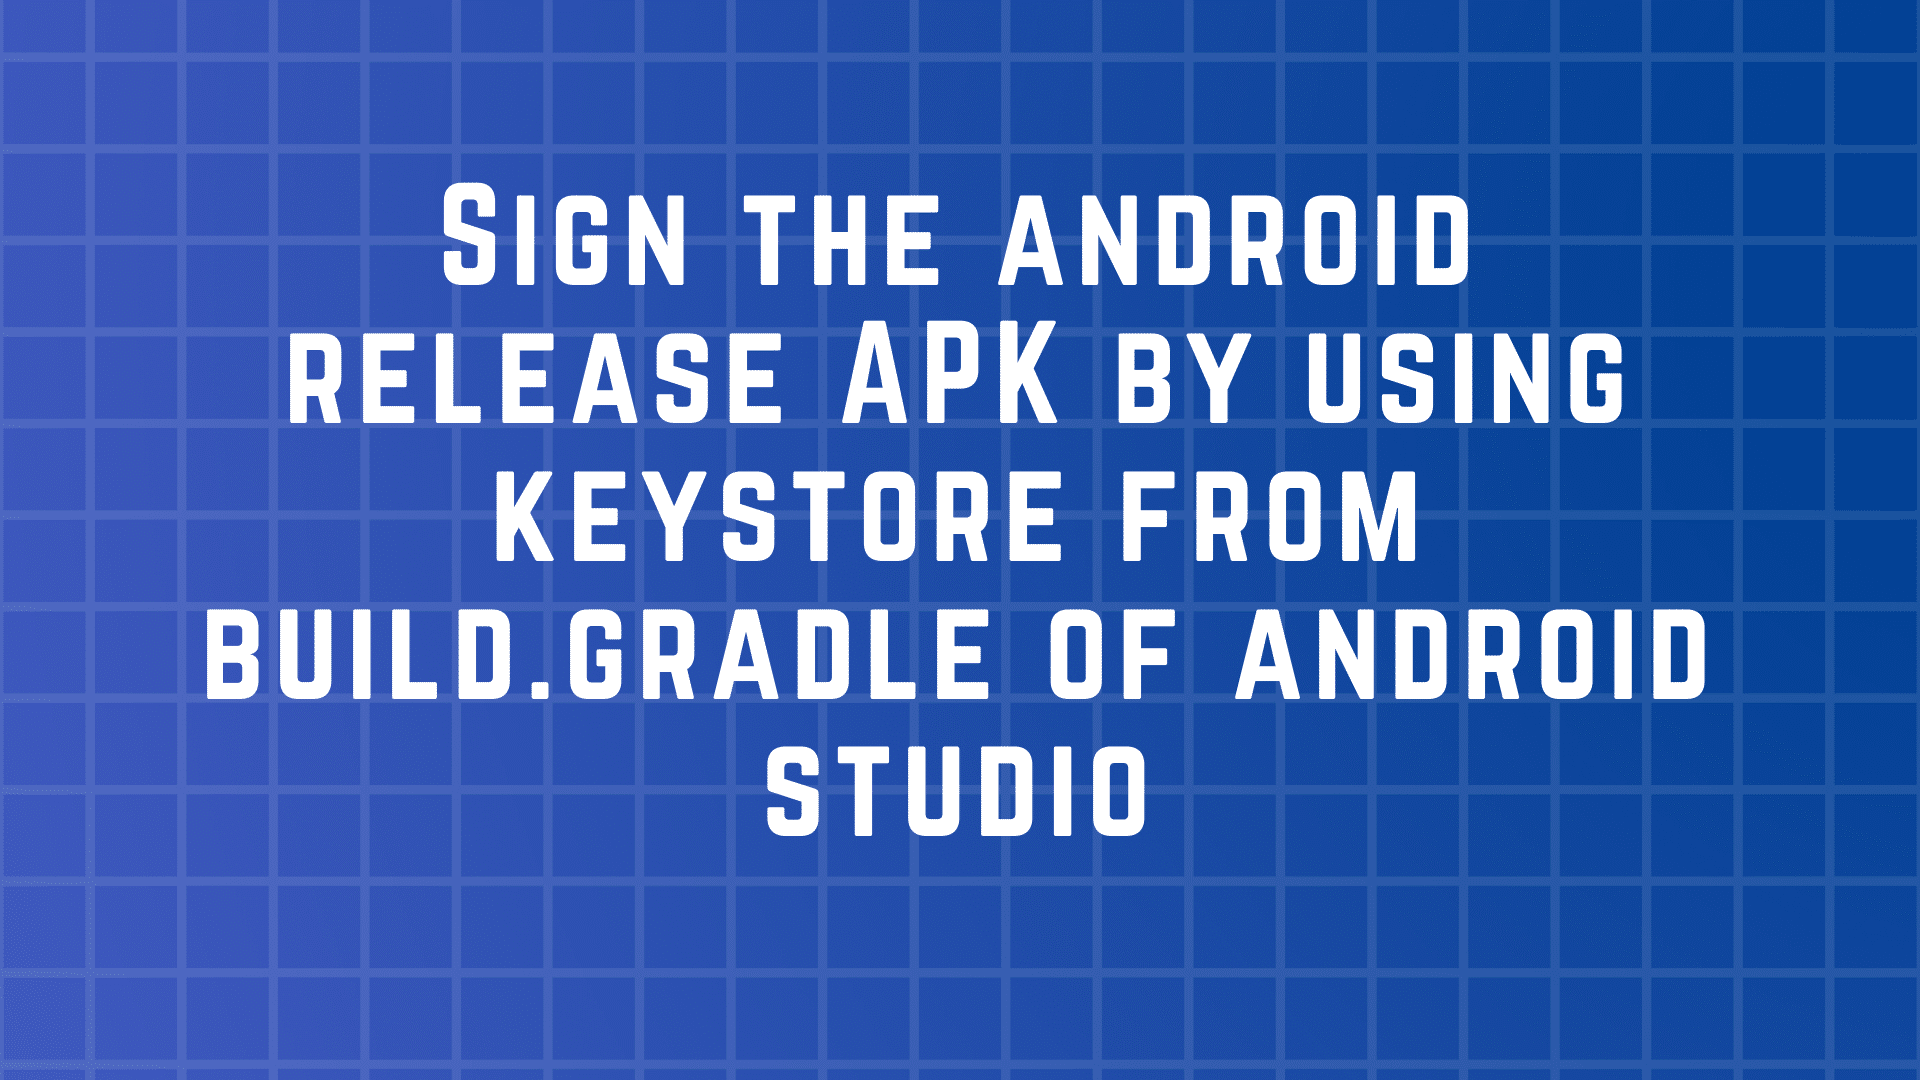 Automatic Signed the android release APK by using keystore from build.gradle of android studio